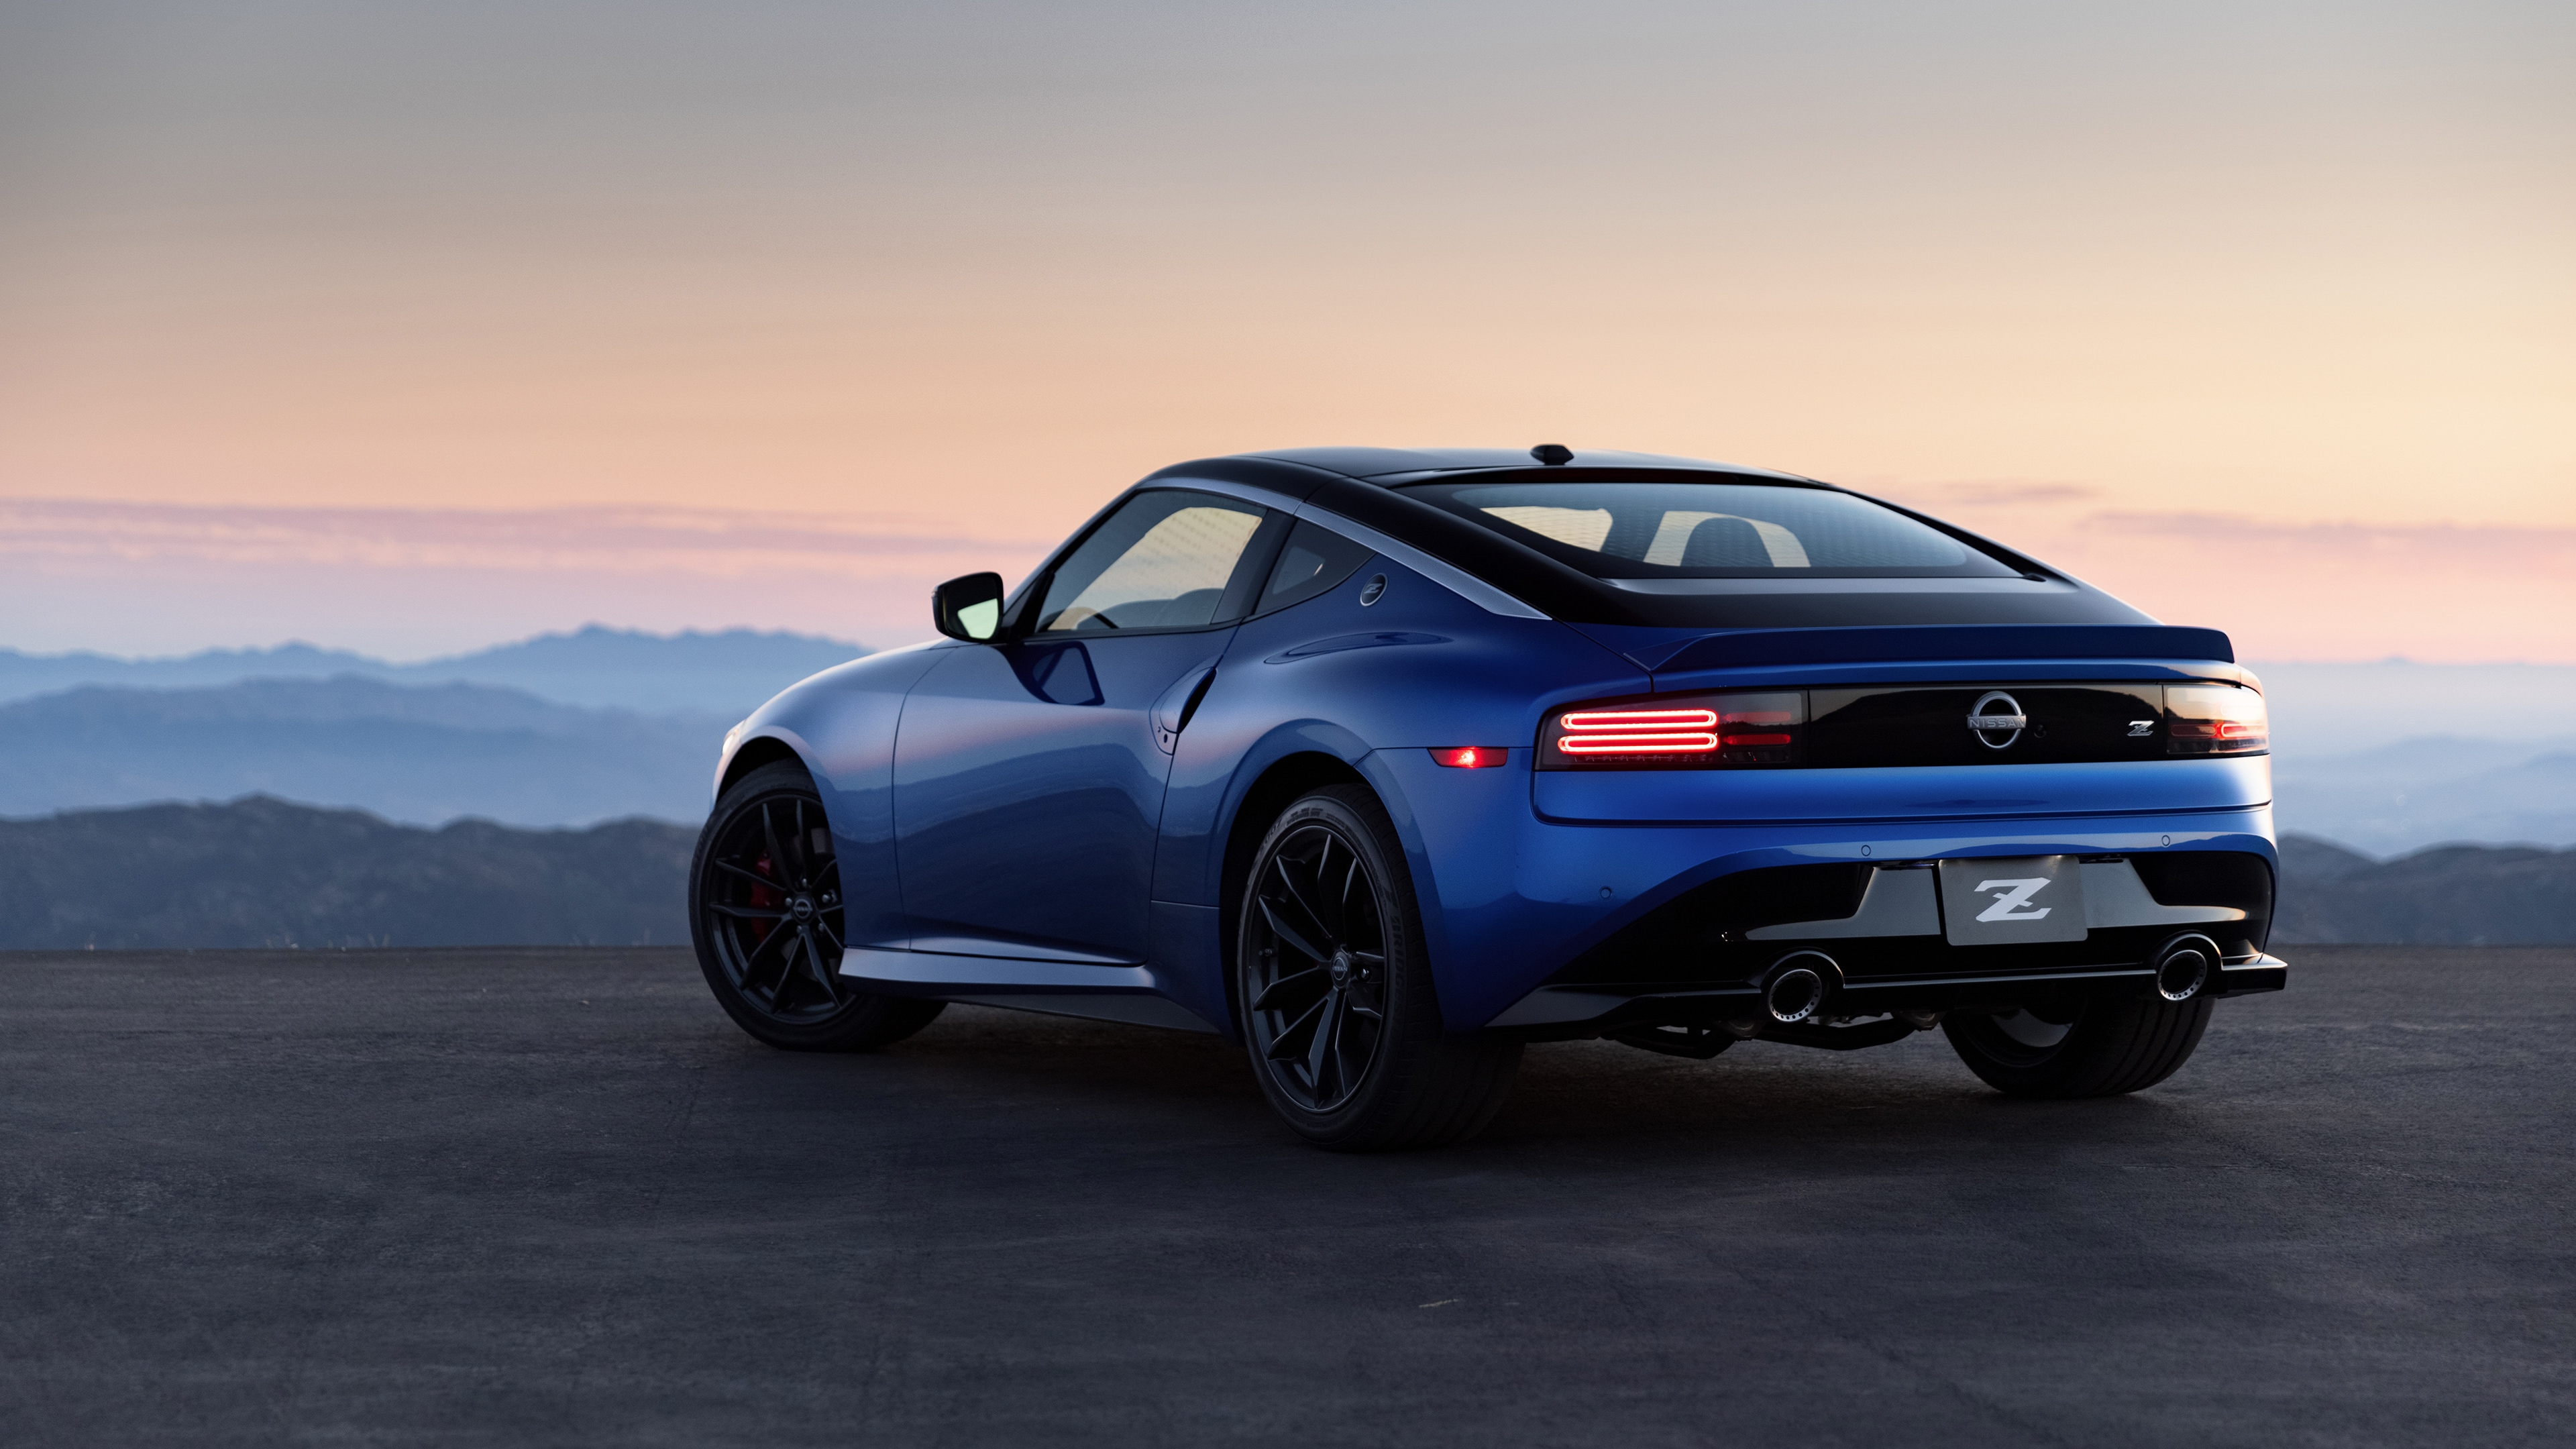 rear-view-of-blue-metallic-2023-nissan-z-at-dusk-with-brake-lights-on-3840x2160.jpg